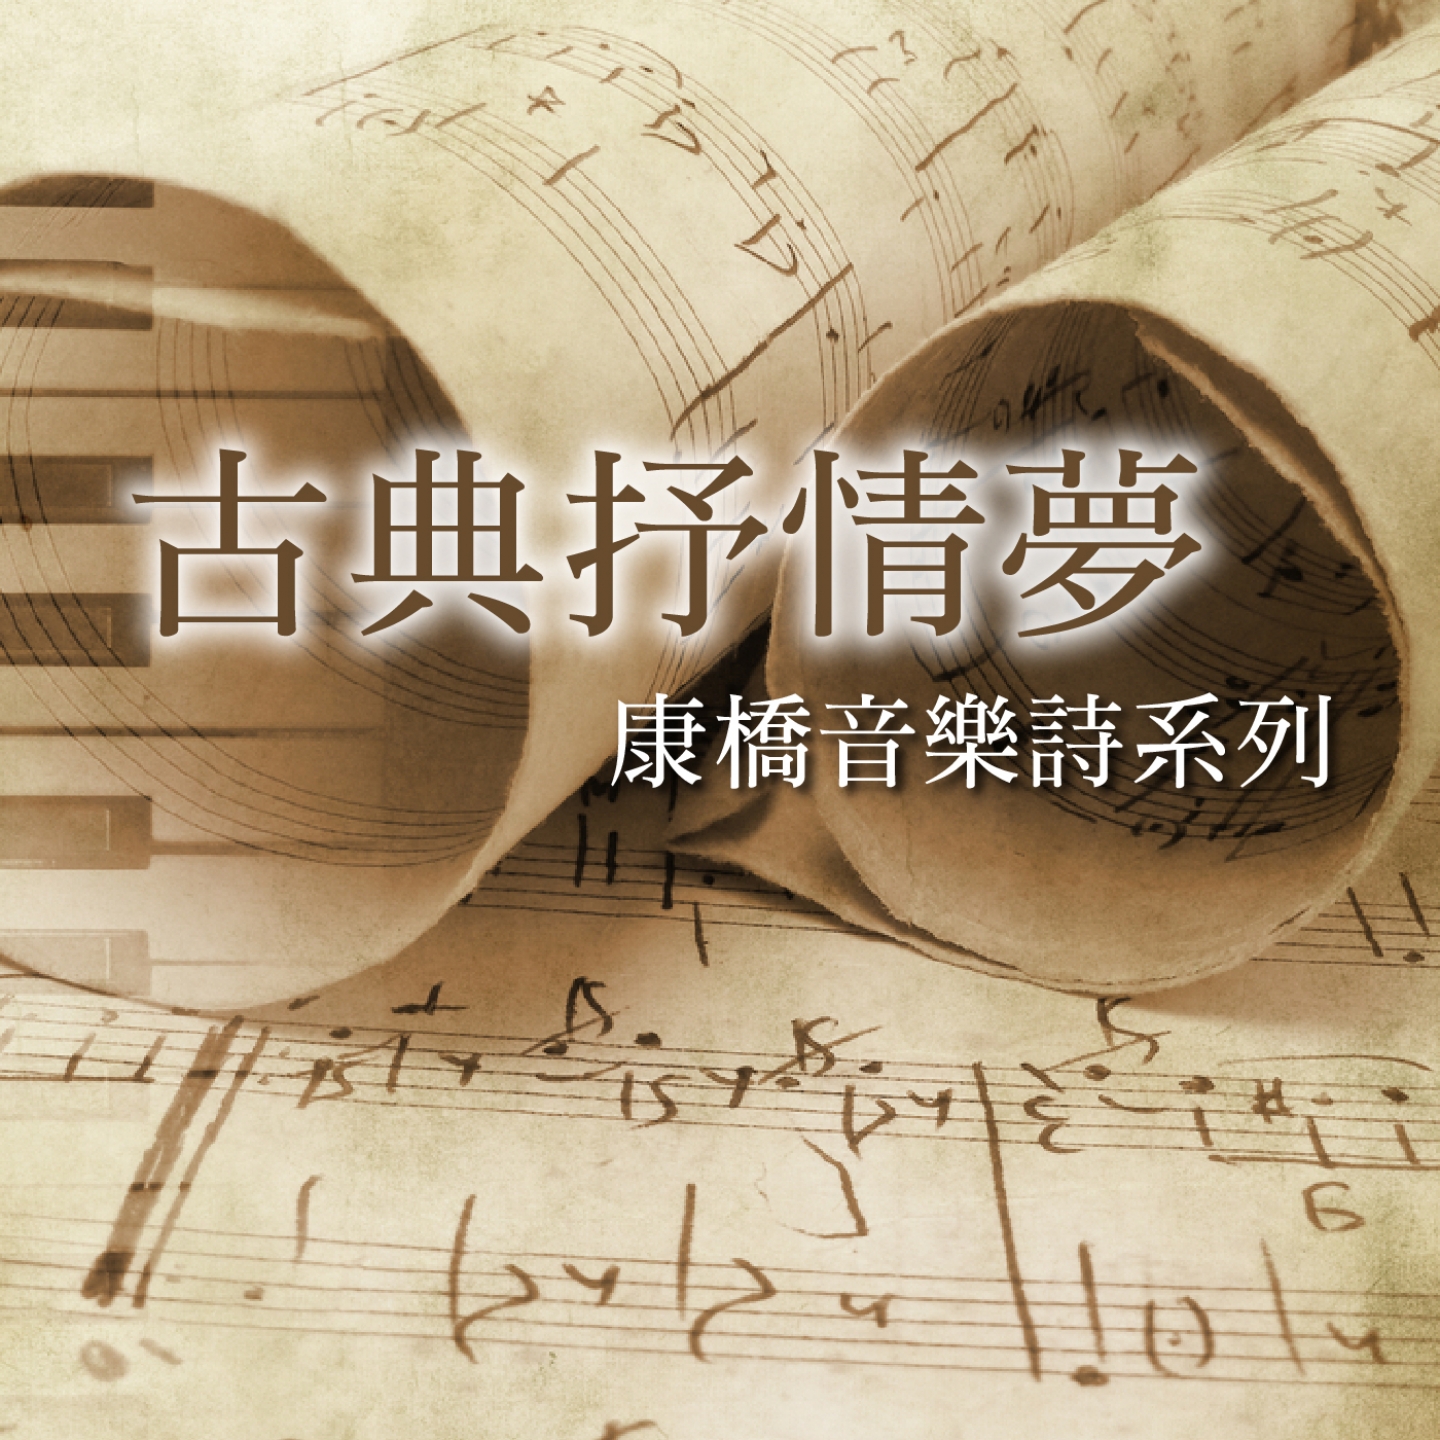 Dream of Classical Music by Kang Qaio